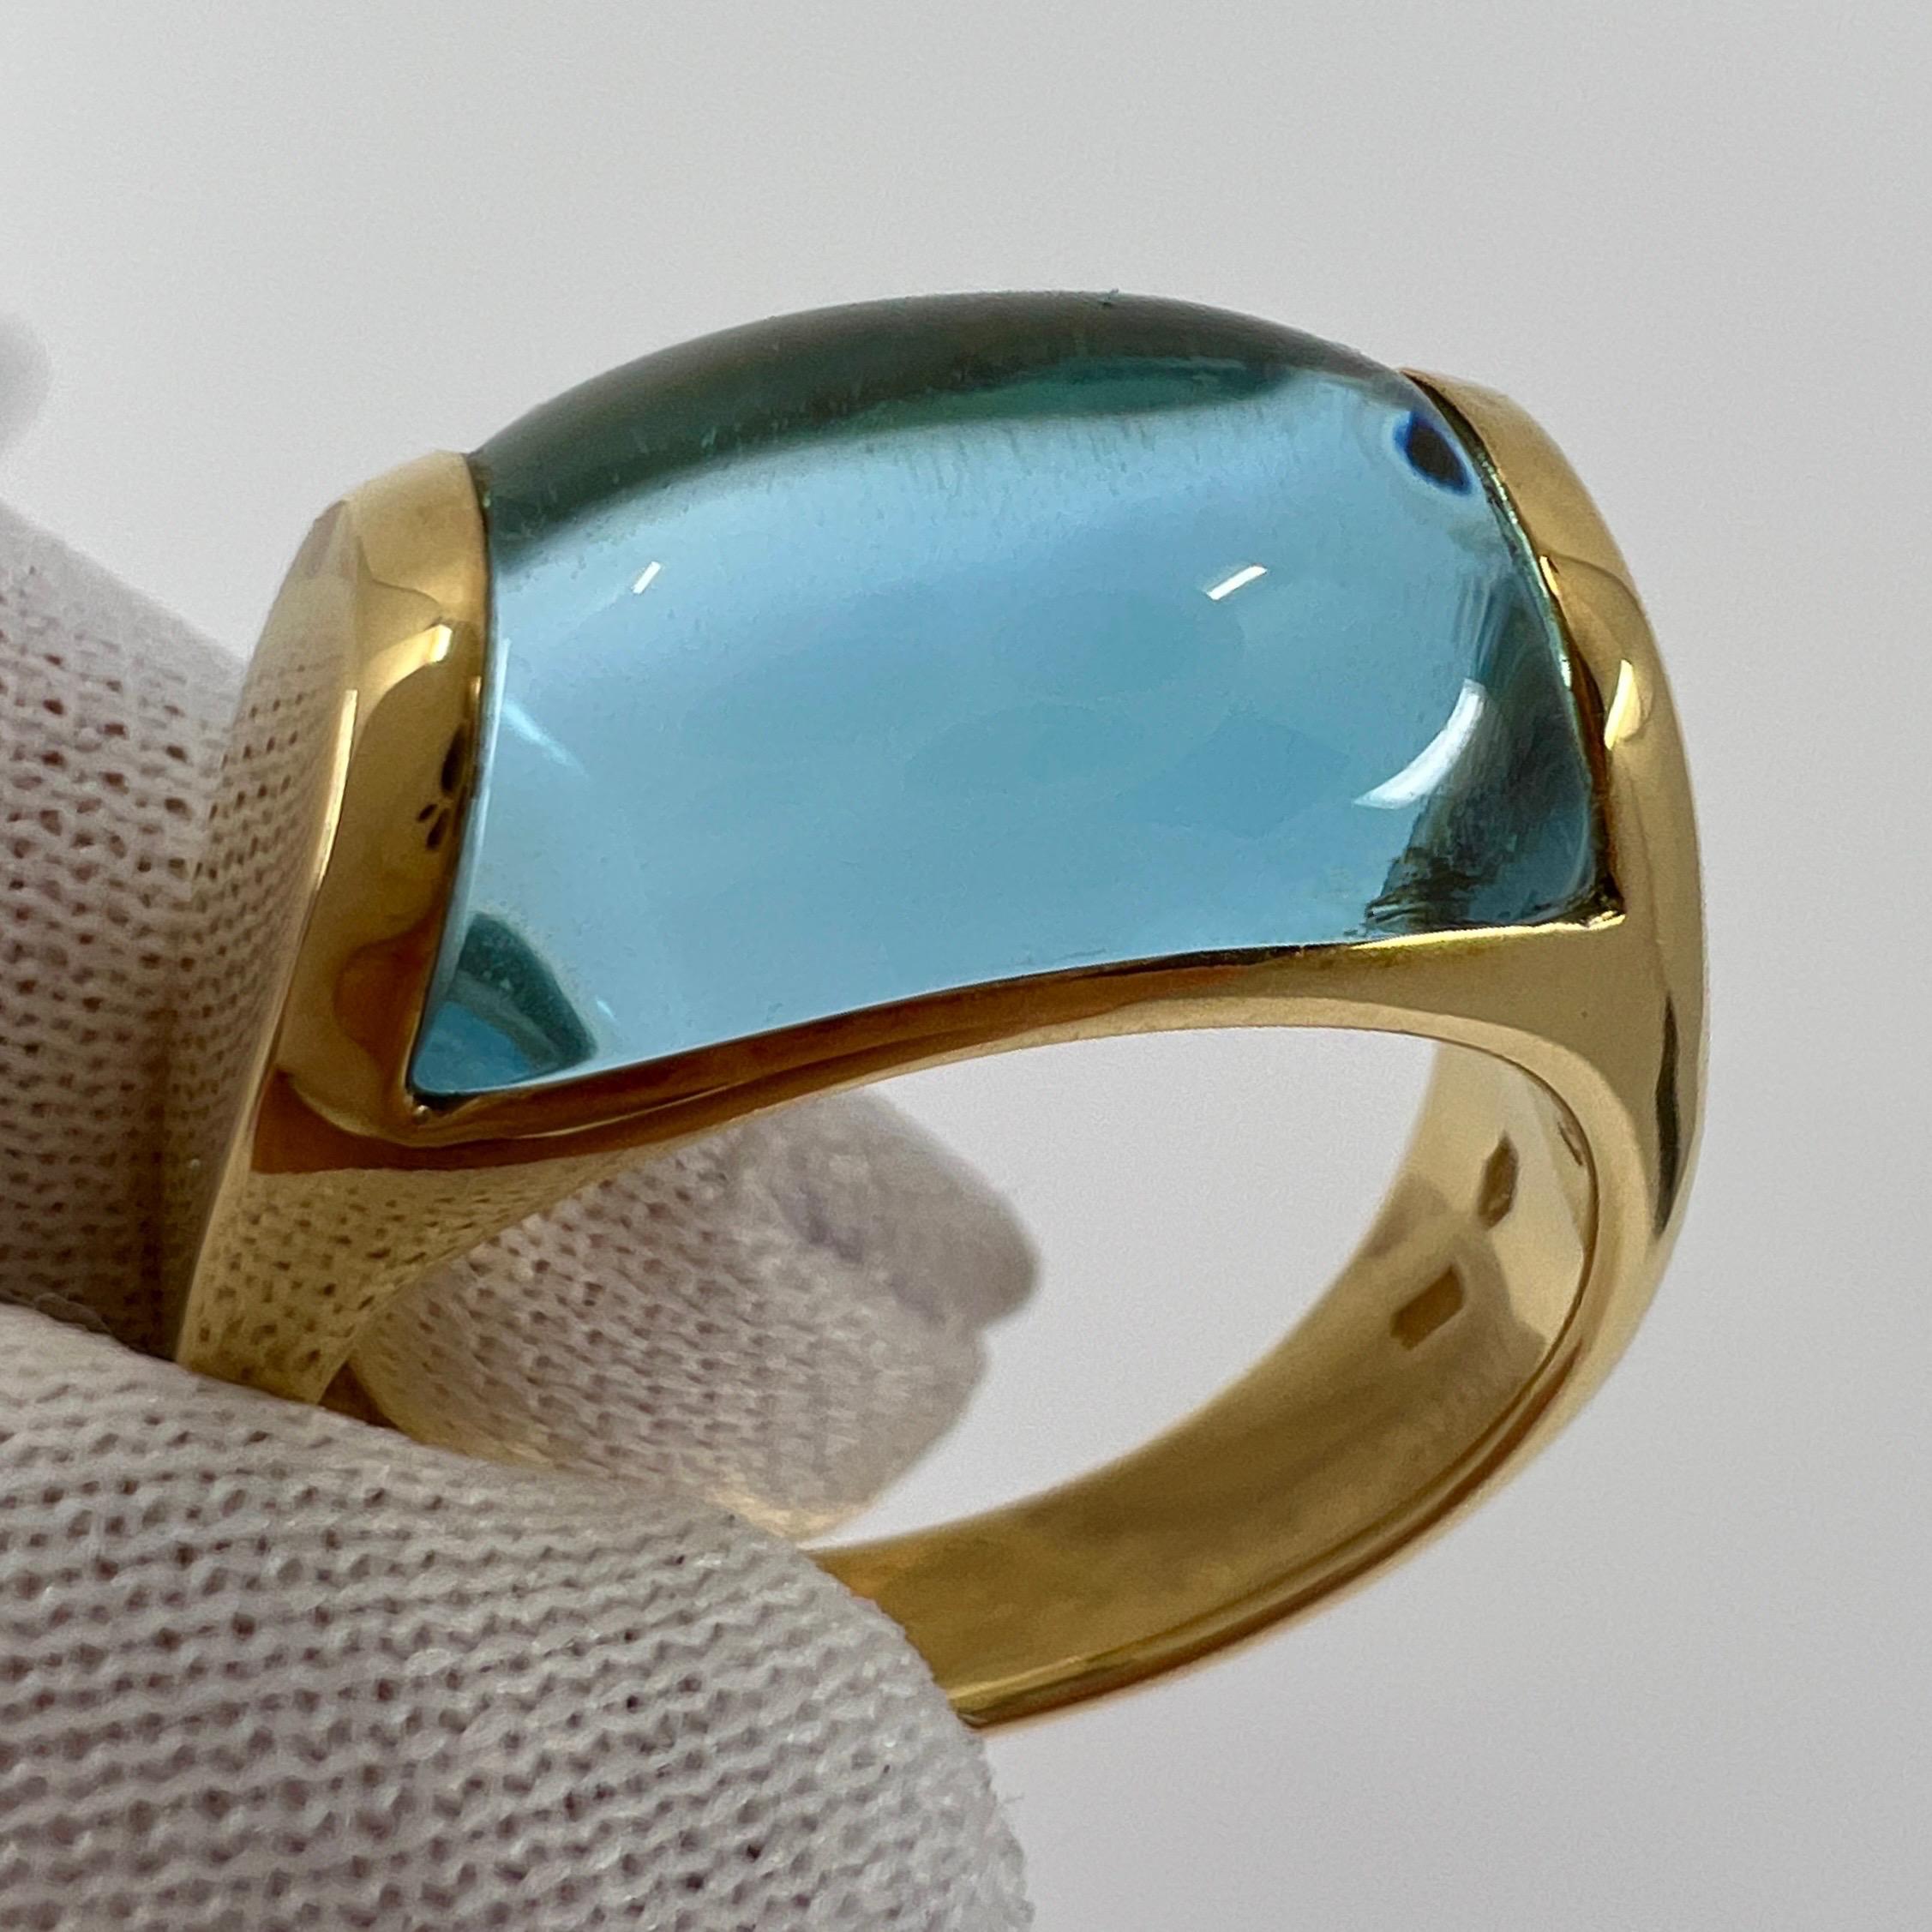 Cabochon Vintage Bvlgari Tronchetto 18k Yellow Gold Blue Topaz Dome Ring with Box